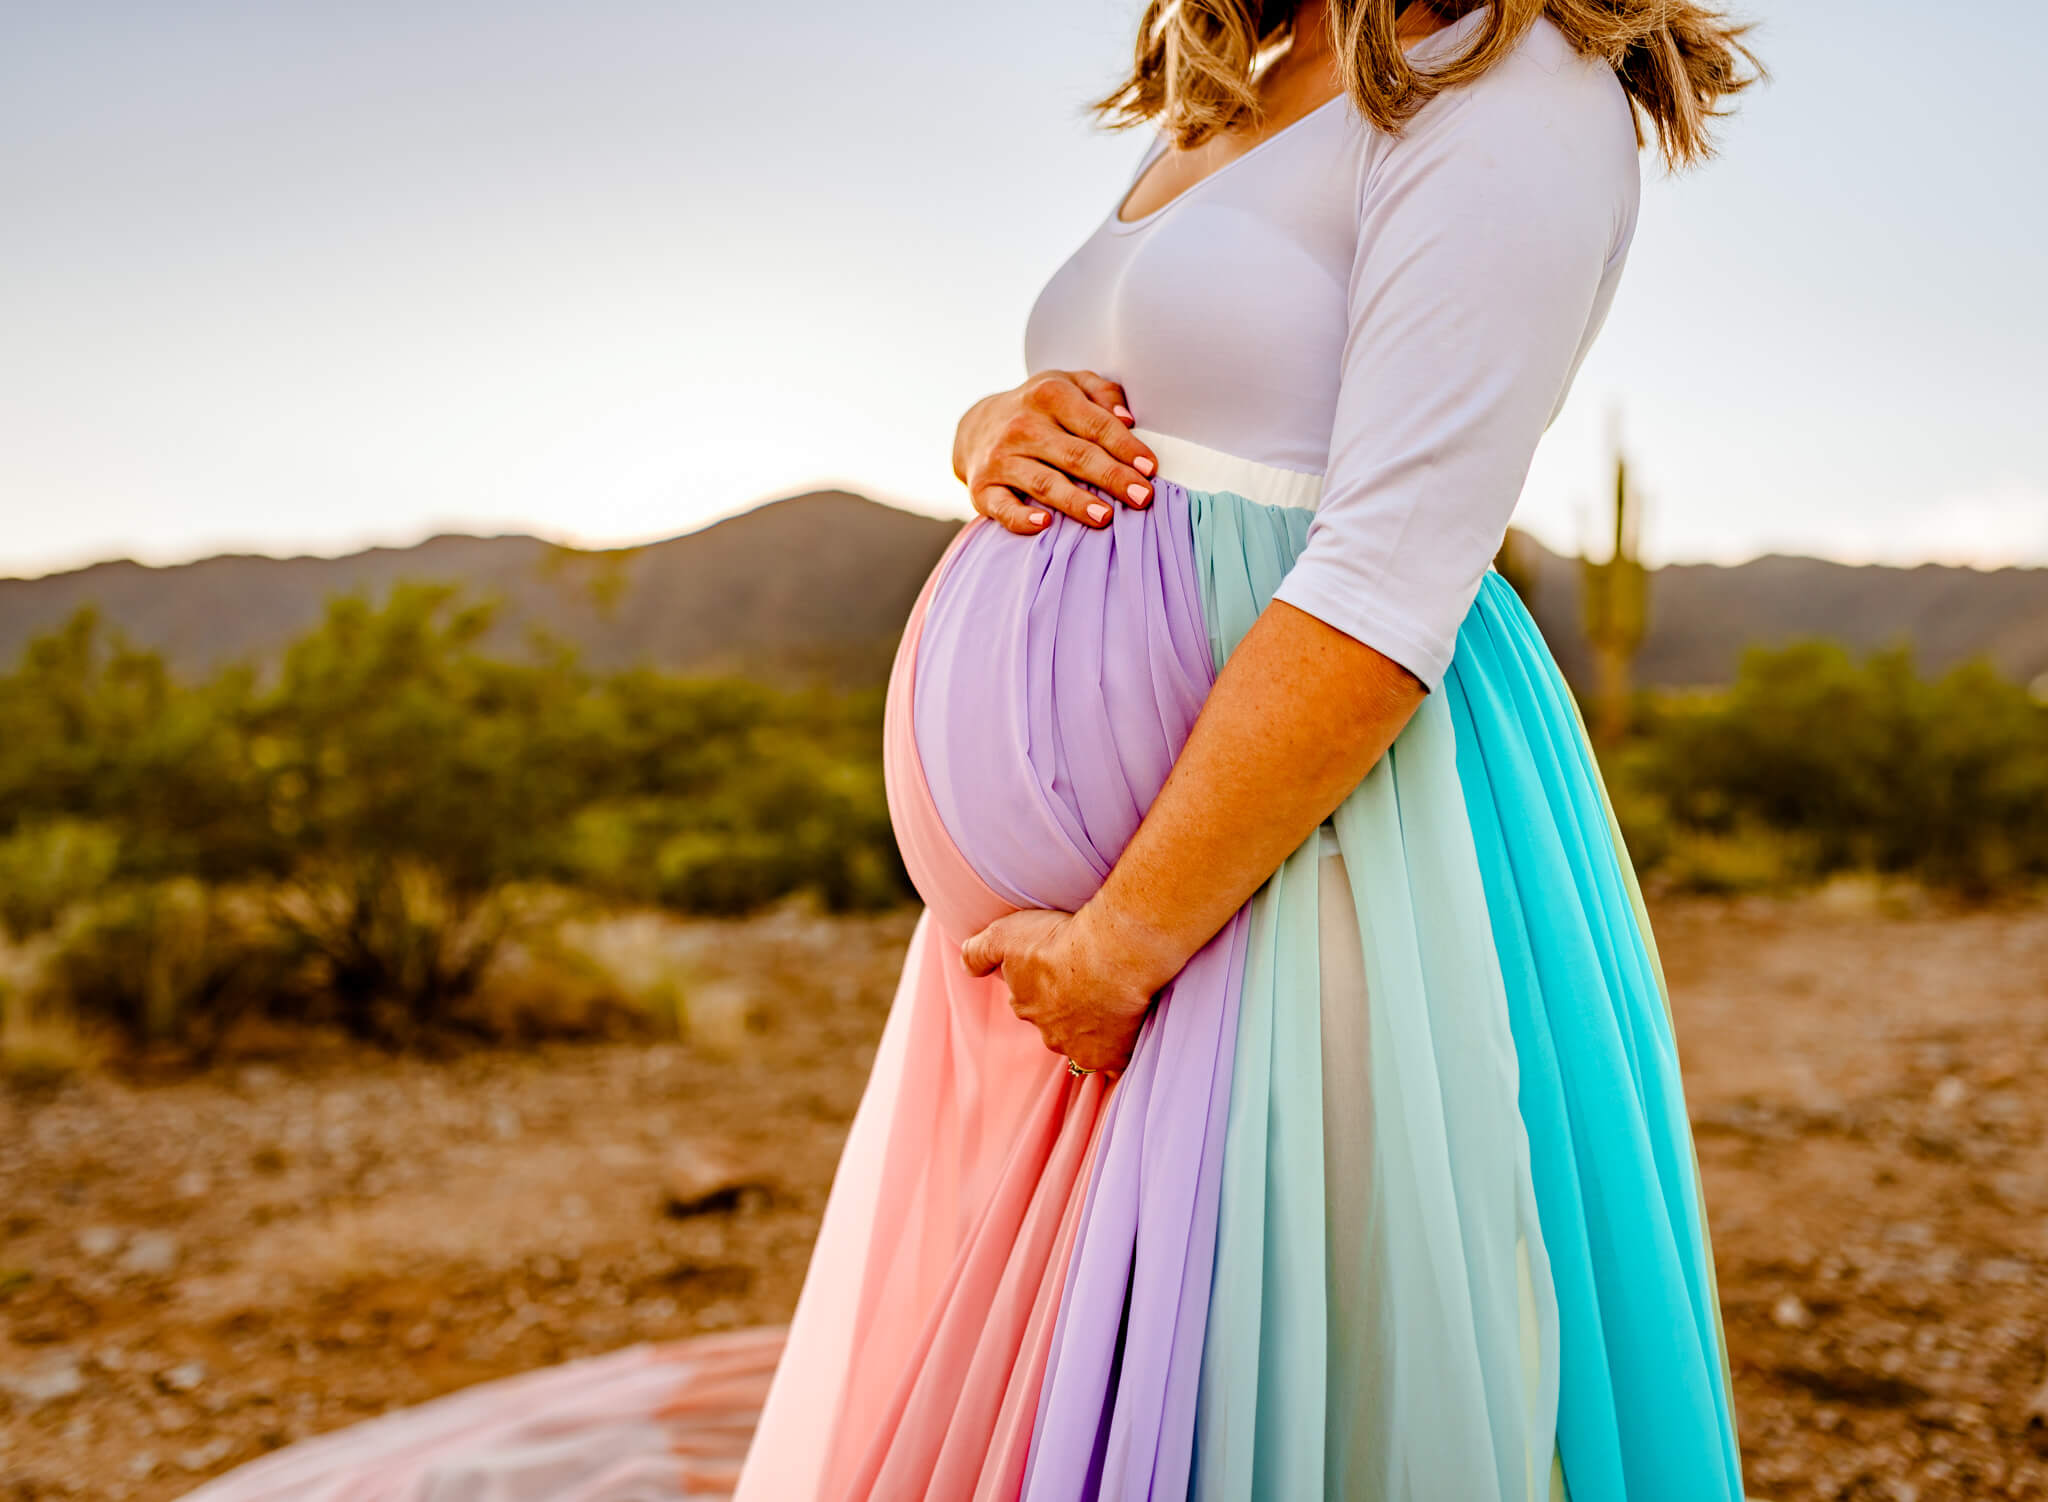 Premier Care for women mom's hands on baby bump with rainbow skirt